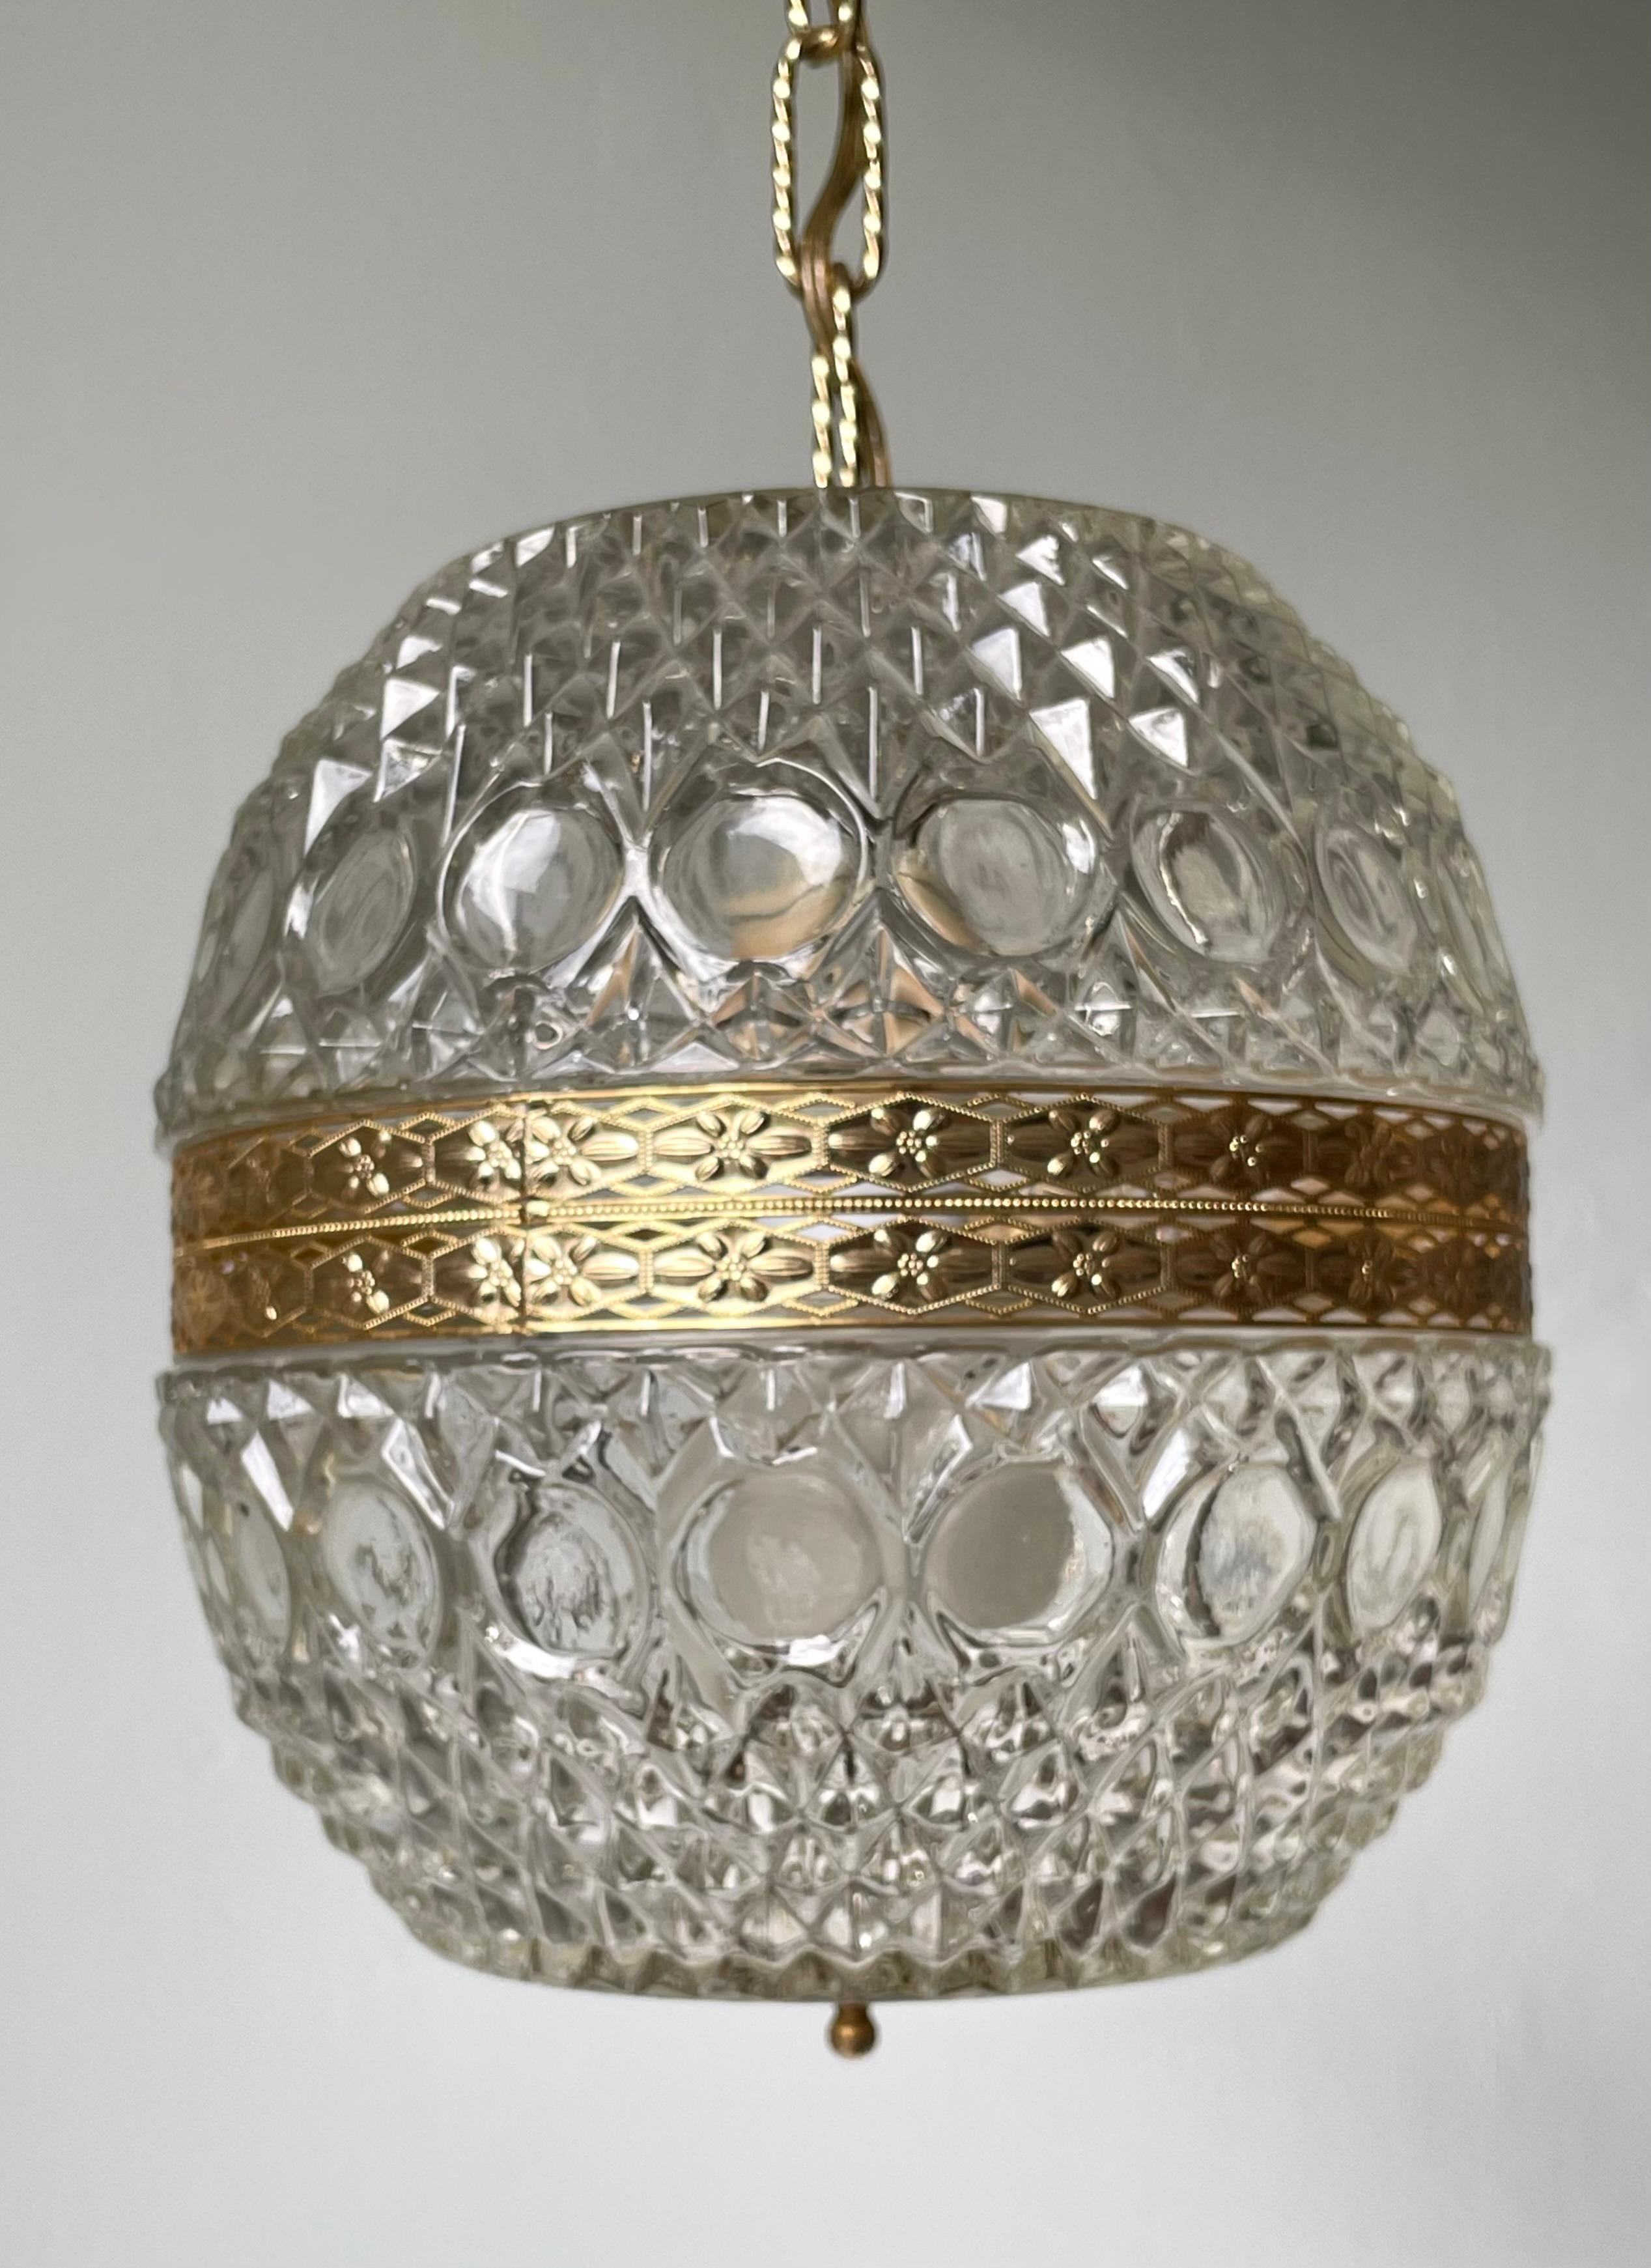 Large Bohemian Art Nouveau textured art glass pendant. Clear angled and rounded barrel shape with a center band of gilt metal decorated with stylized floral motifs. Original golden textured metal canopy and 1 meter long chain. Beautiful vintage